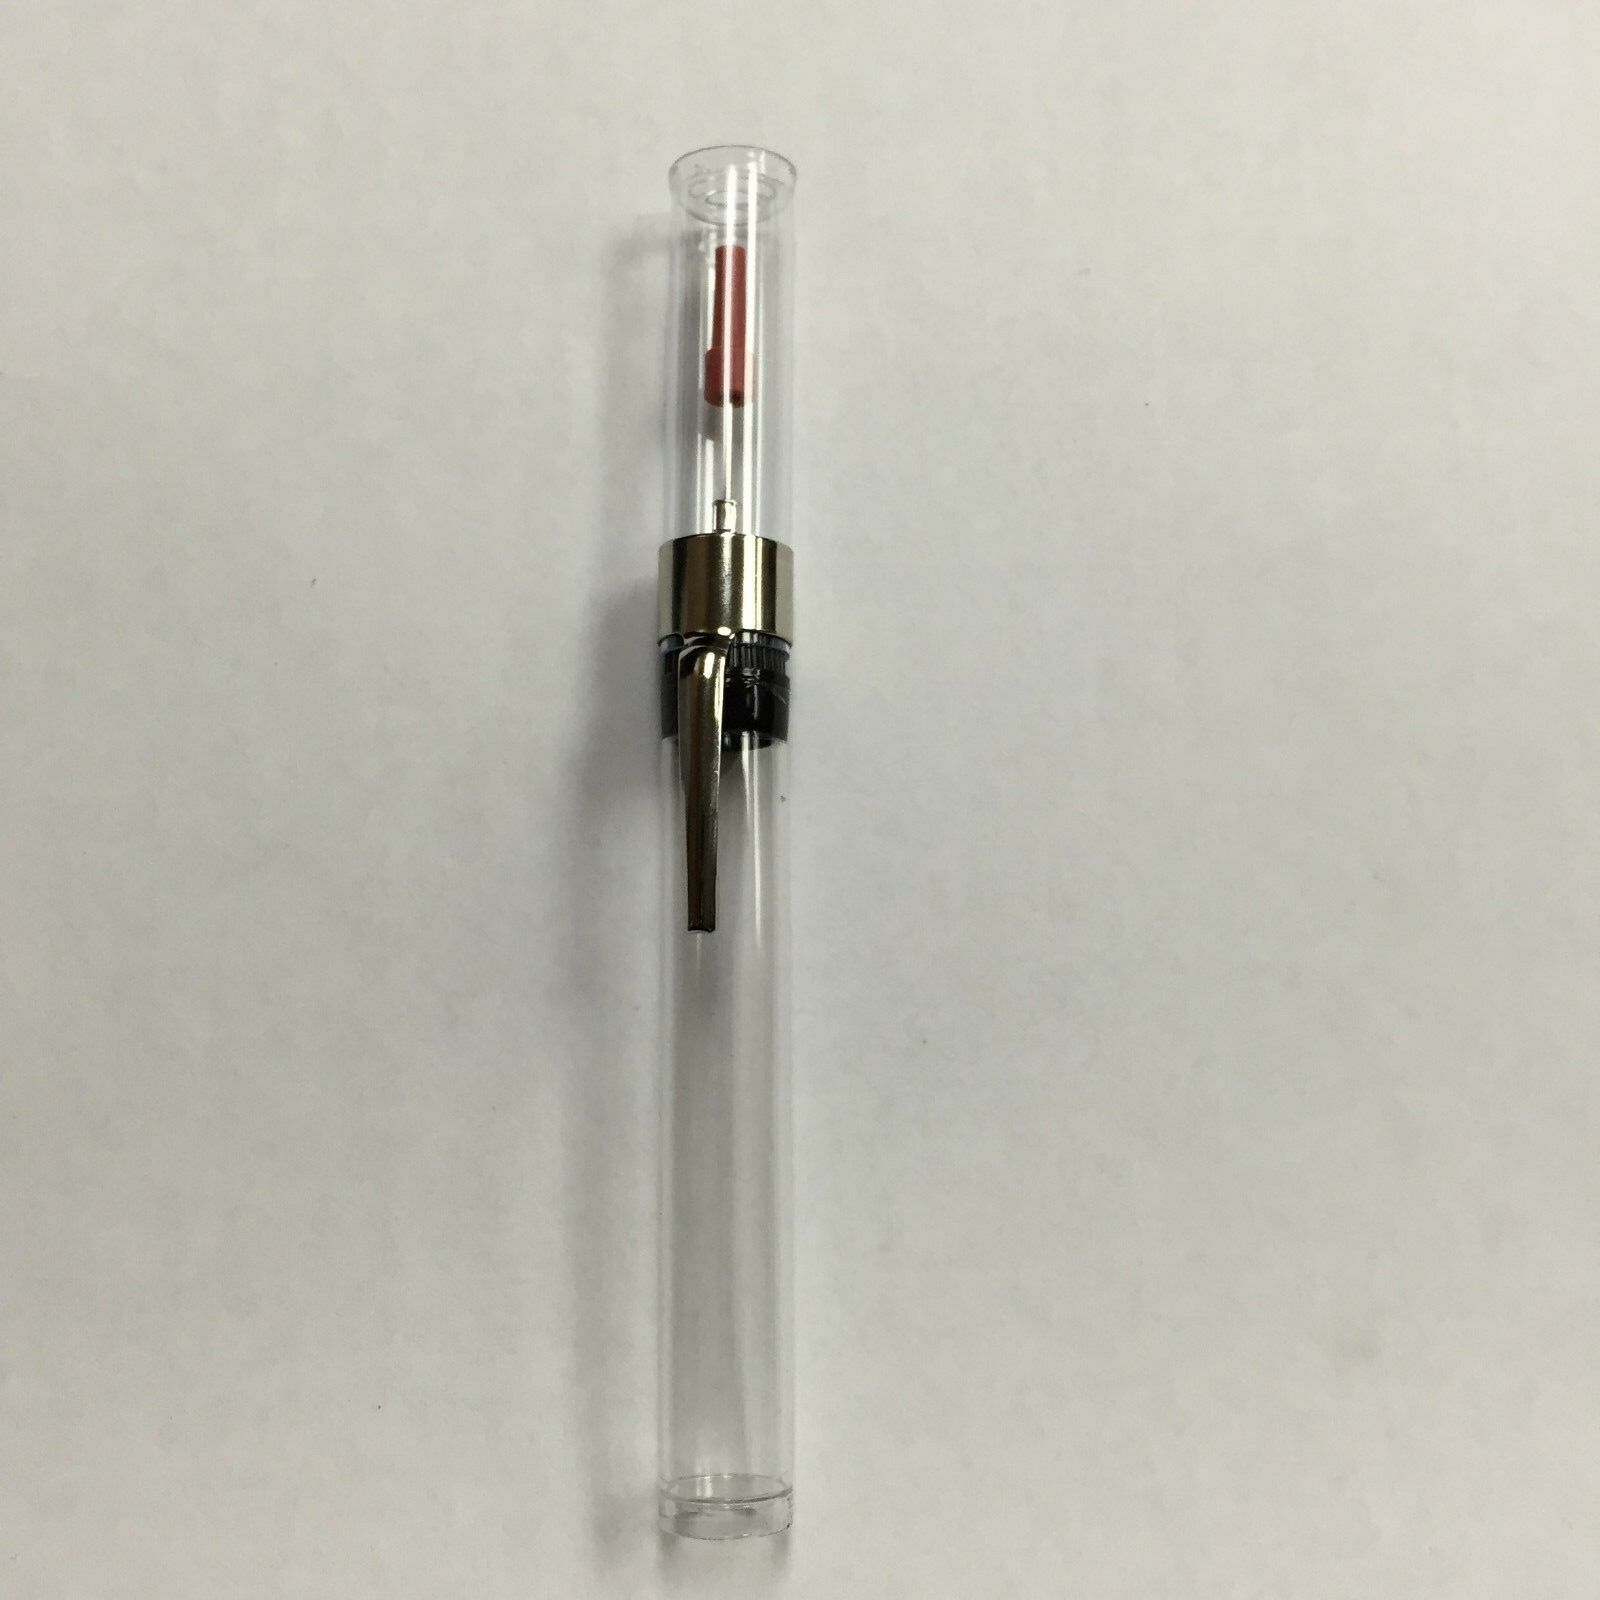 1 Each Refillable Precision Needle Point Oiler Without Oil (empty) Ew2132a